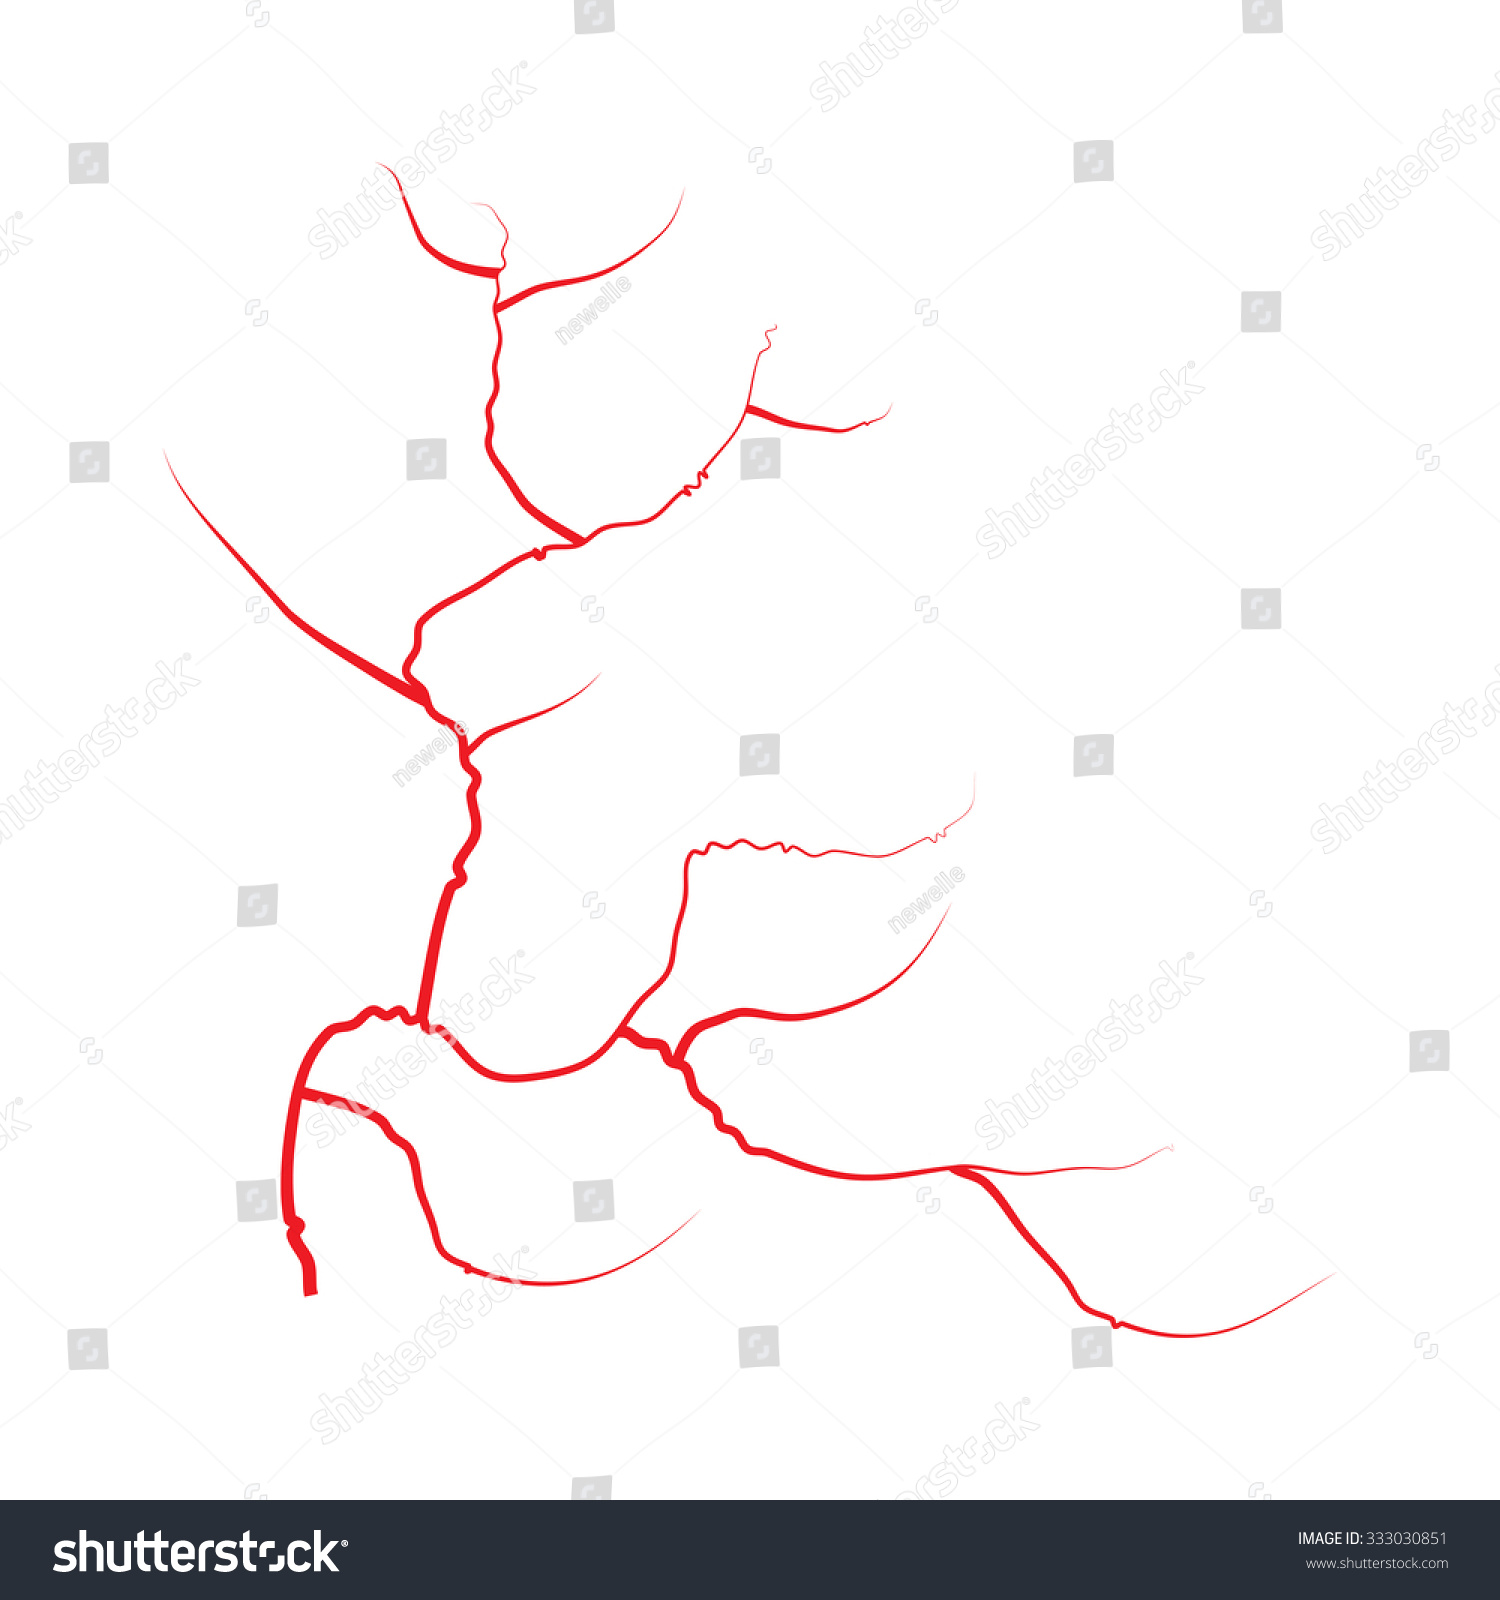 clipart of blood vessels - photo #22